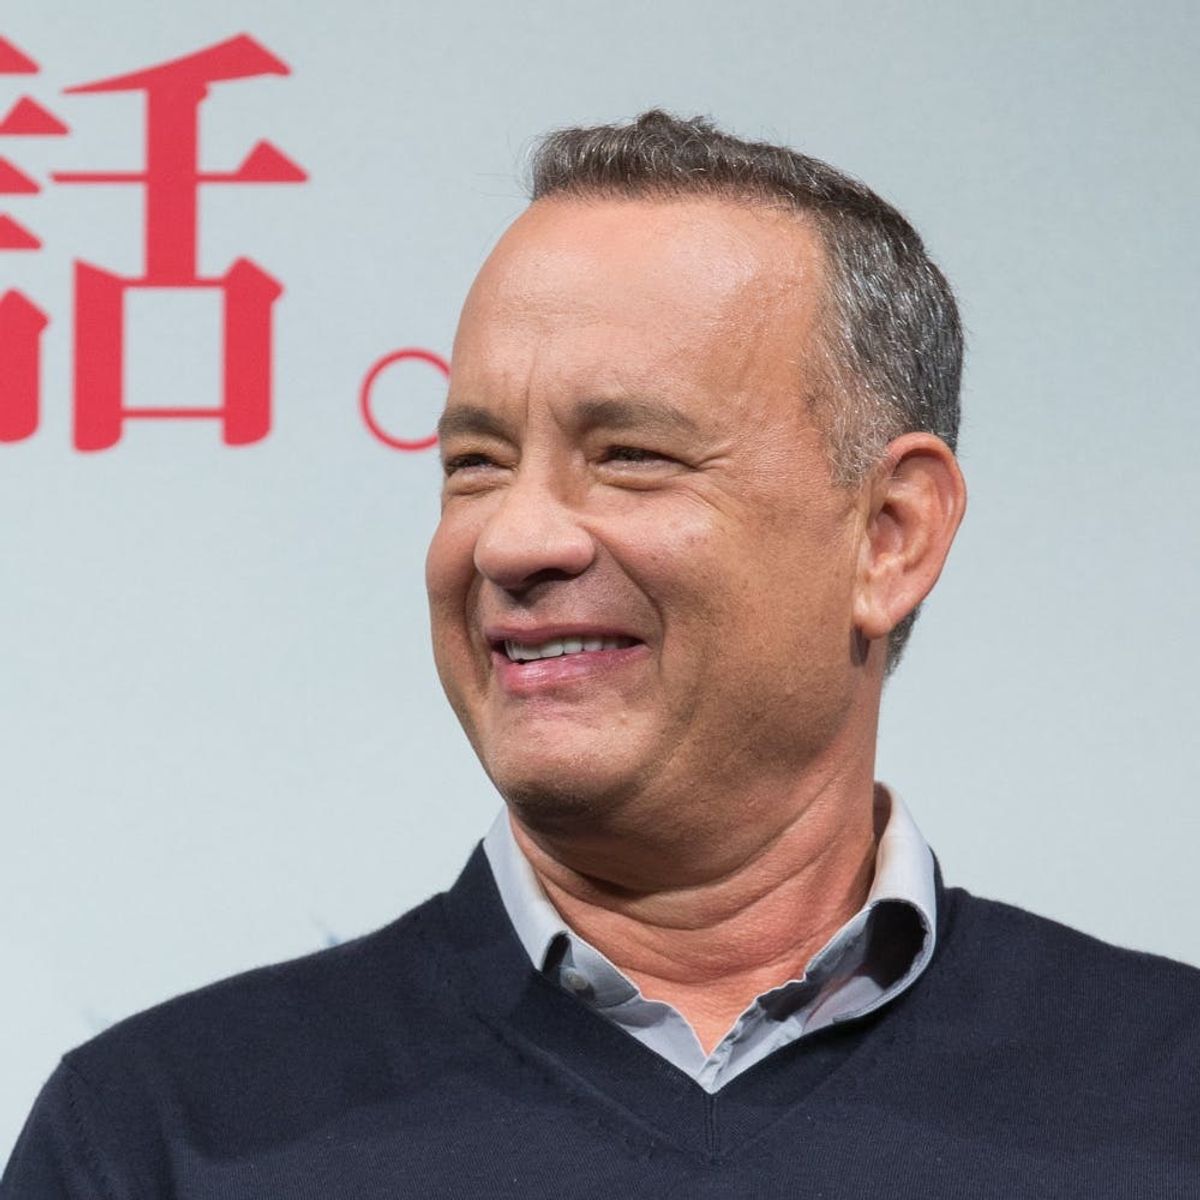 Tom Hanks Crashing a Wedding Photo Shoot Is the Sweetest Thing Ever